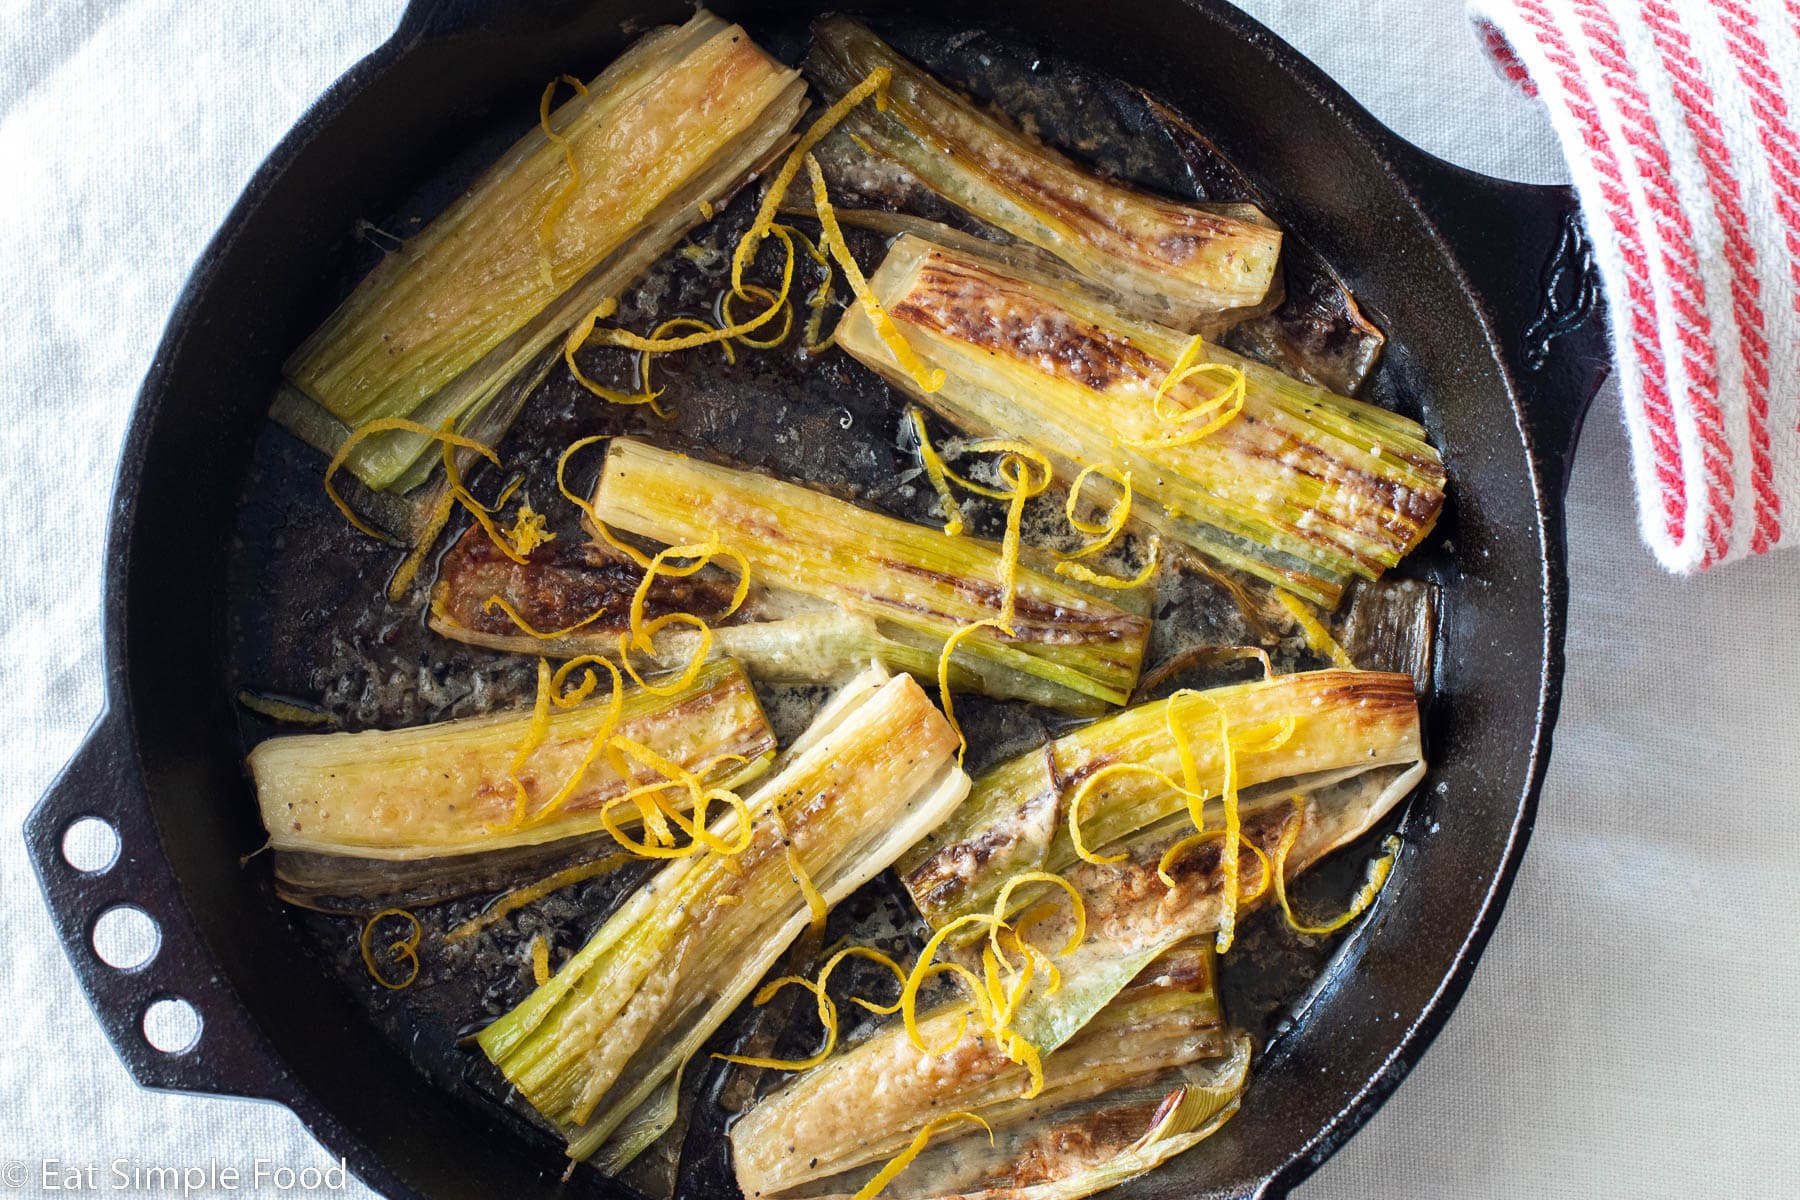 Eight seared leeks in a cast iron skillet on a white table cloth. Leeks are garnished with Parmesan cheese and lemon zest. Top down view. Red and white kitchen towel around handle of cast iron skillet.